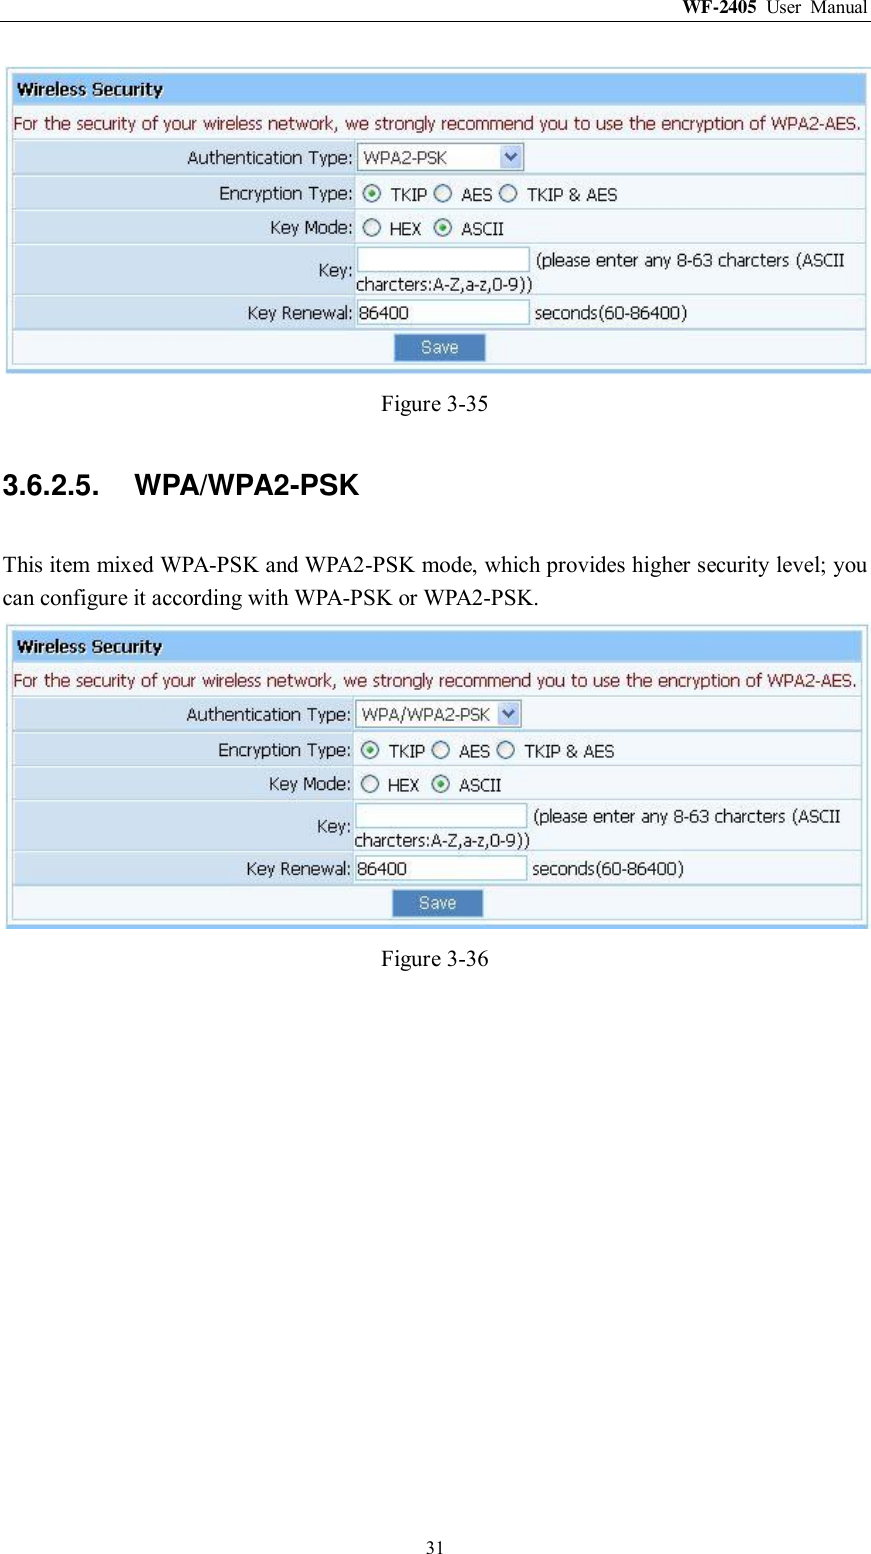 WF-2405  User  Manual  31  Figure 3-35 3.6.2.5.  WPA/WPA2-PSK This item mixed WPA-PSK and WPA2-PSK mode, which provides higher security level; you can configure it according with WPA-PSK or WPA2-PSK.  Figure 3-36 